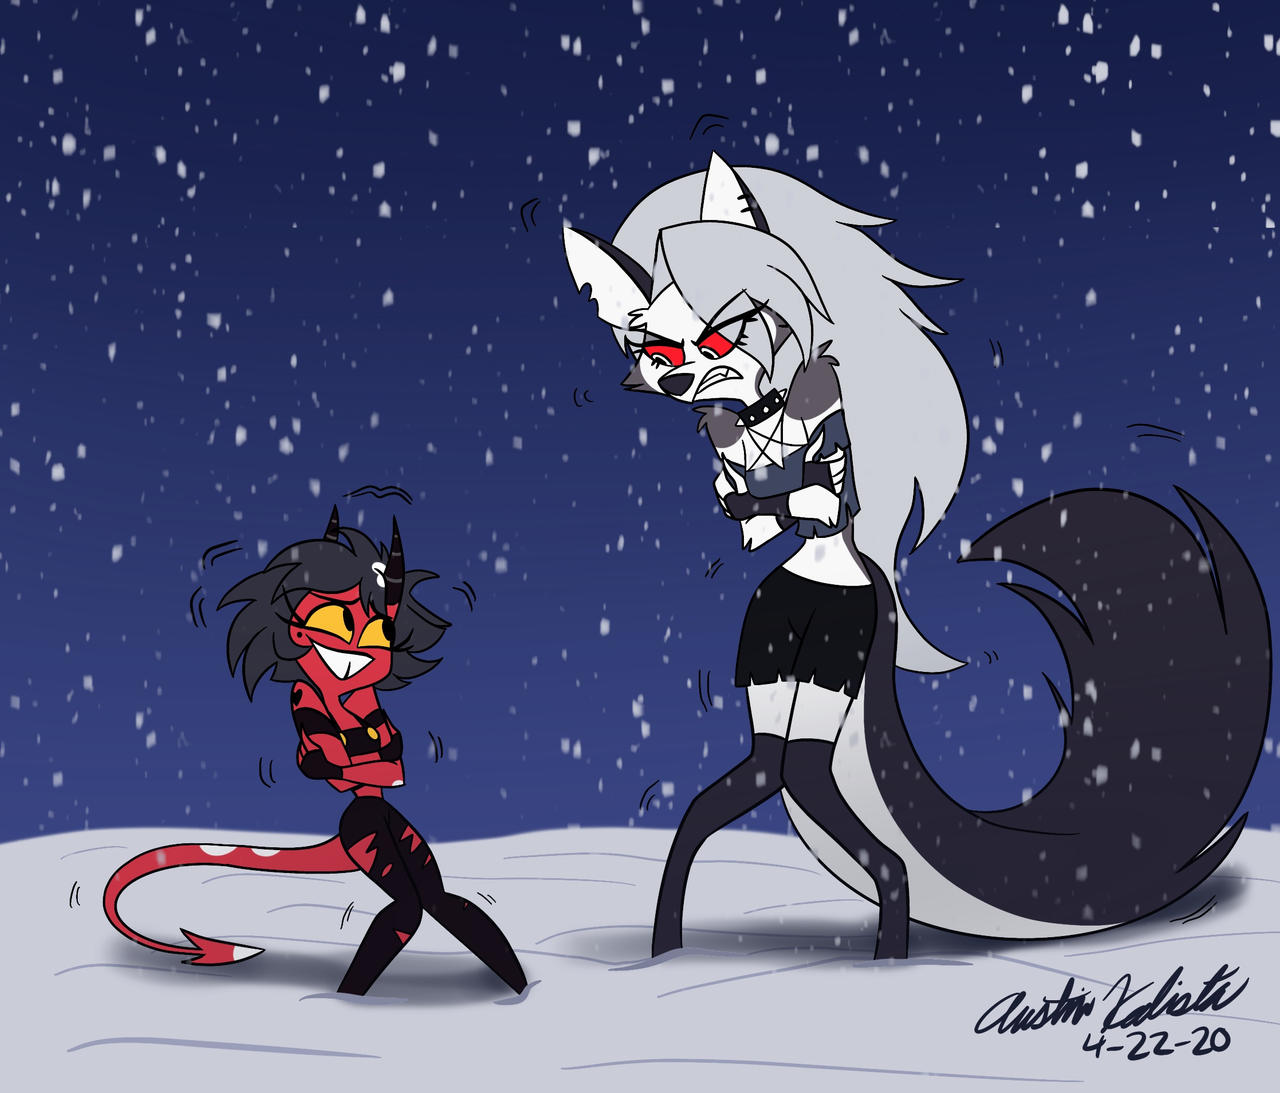 Millie and Loona in the Snow by AustinKalista on DeviantArt